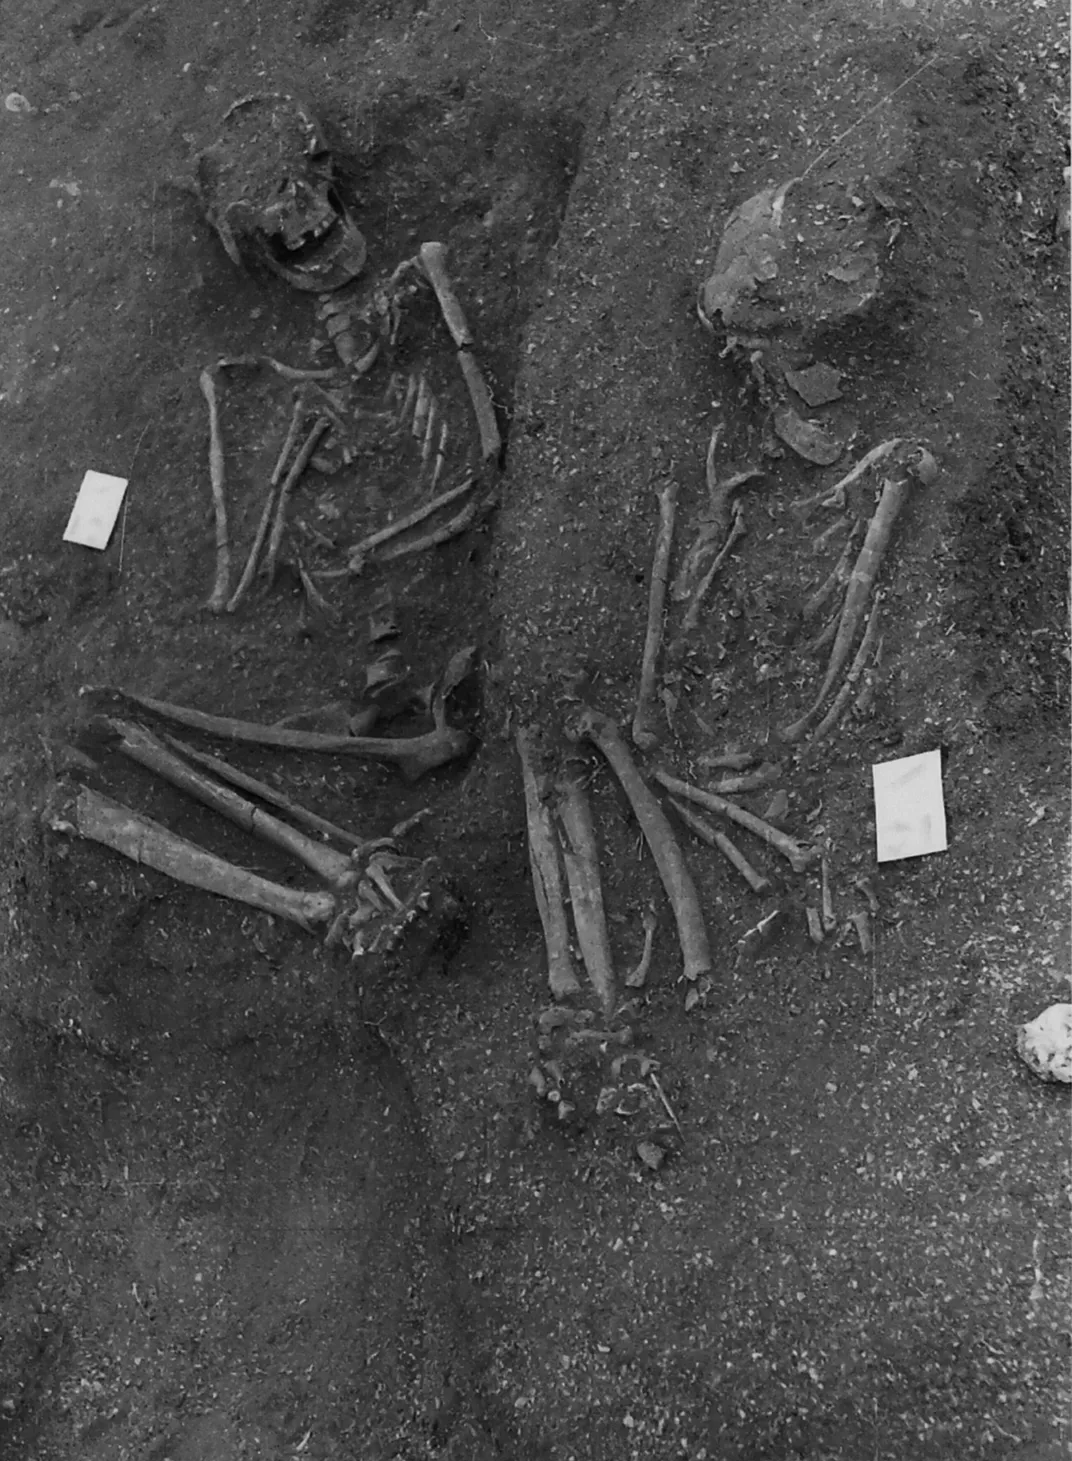 black and white image of two skeletons in fetal positions half buried in sediment at dig site